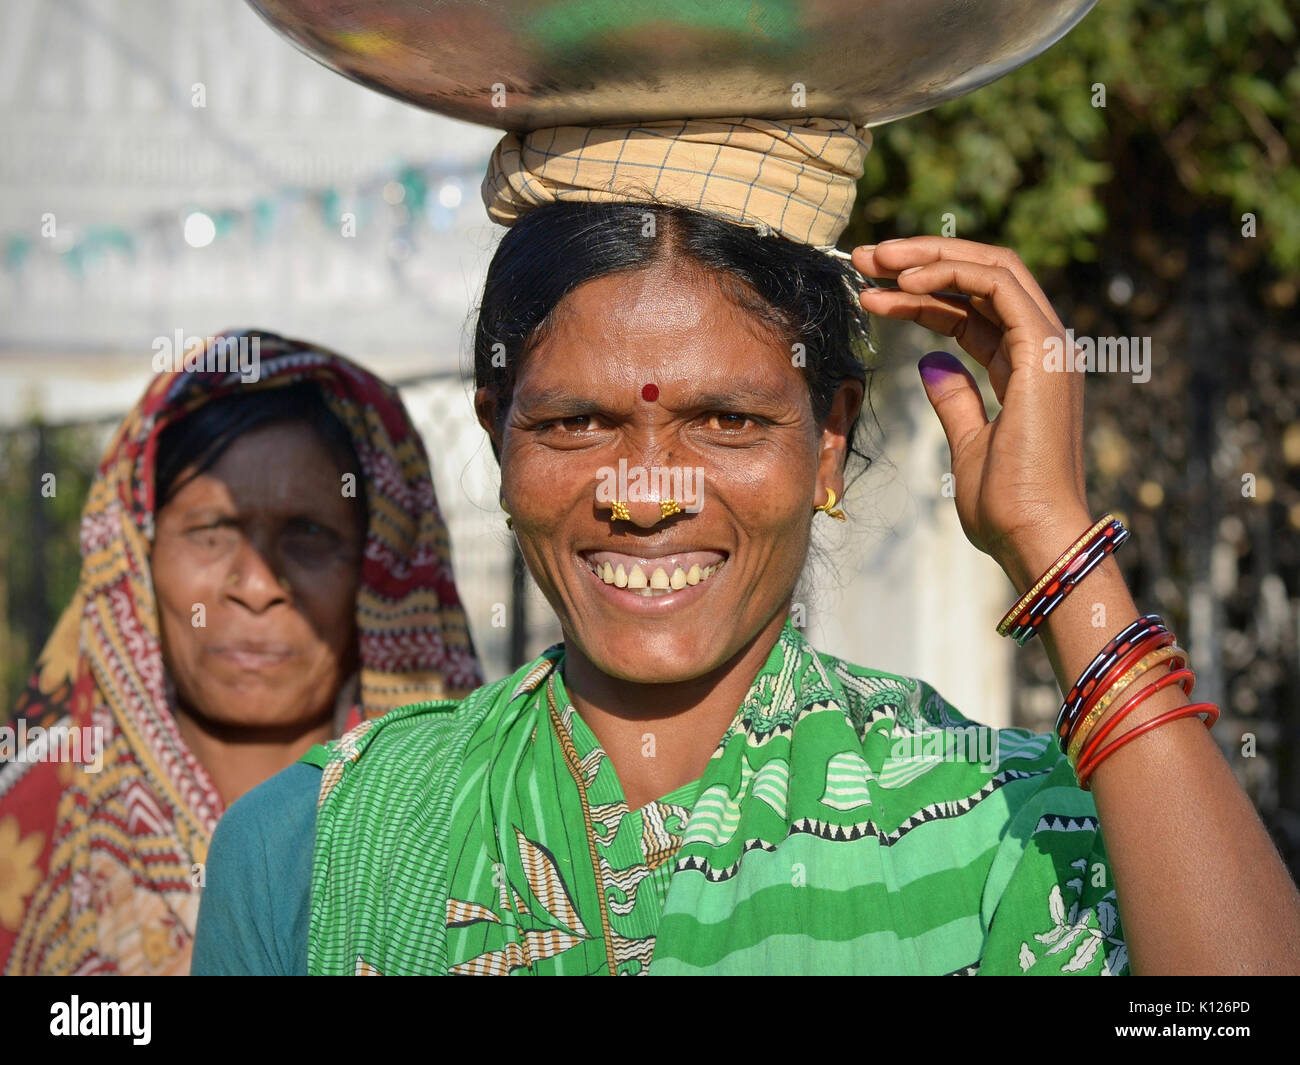 Indian Adivasi woman (Orissan tribal woman) with two distinctive golden nose studs balances on her head a heavy metal bowl and smiles for the camera. Stock Photo